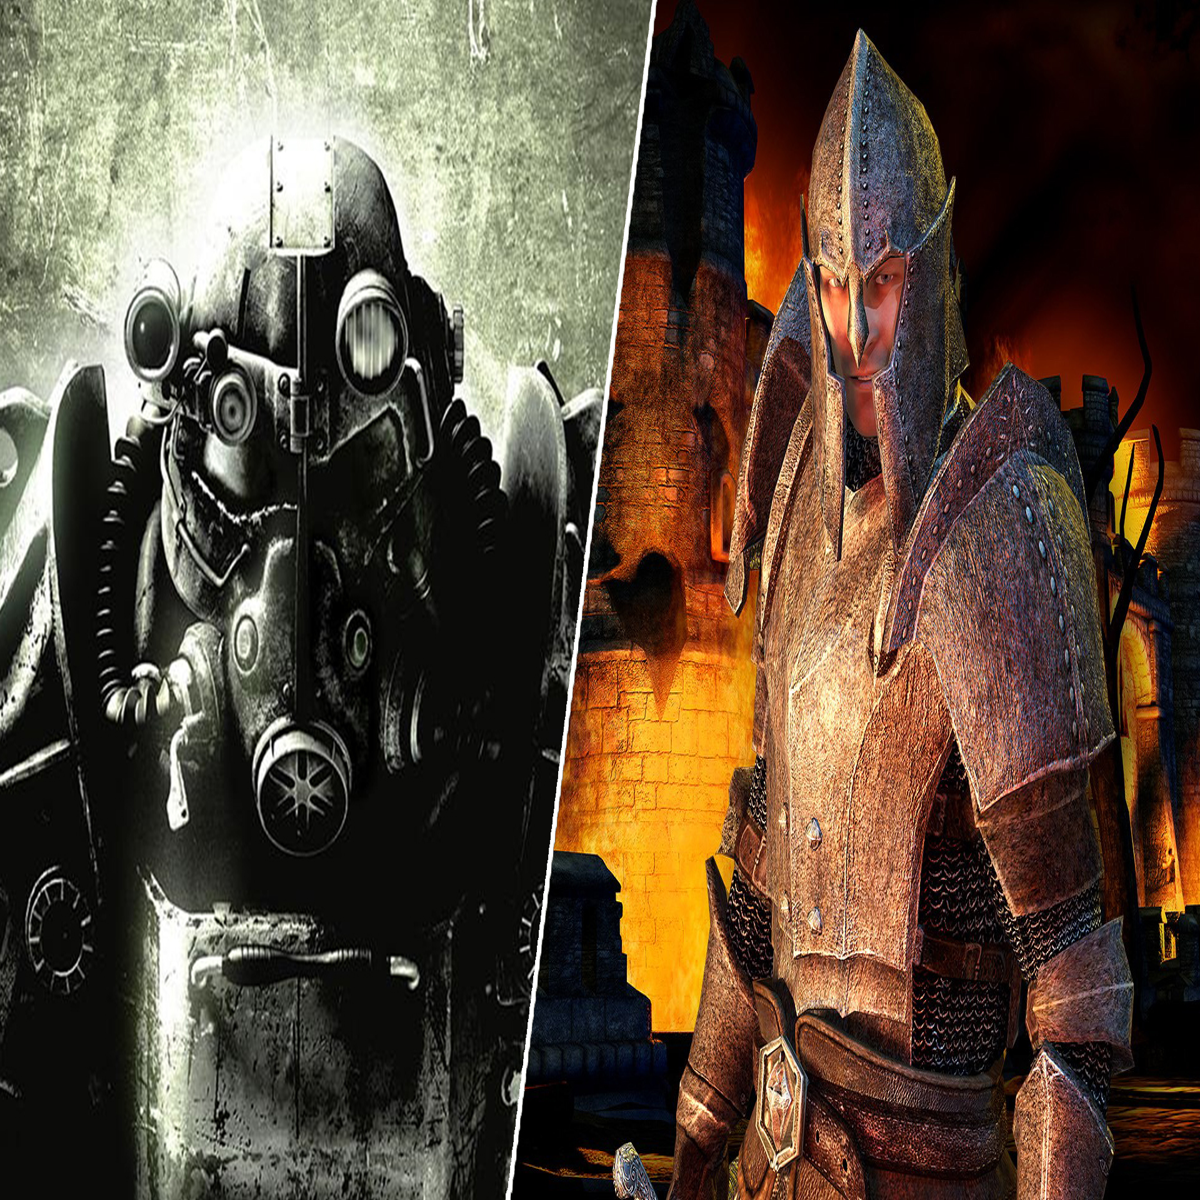 That Oblivion remaster is seemingly real, and Fallout 3 might be